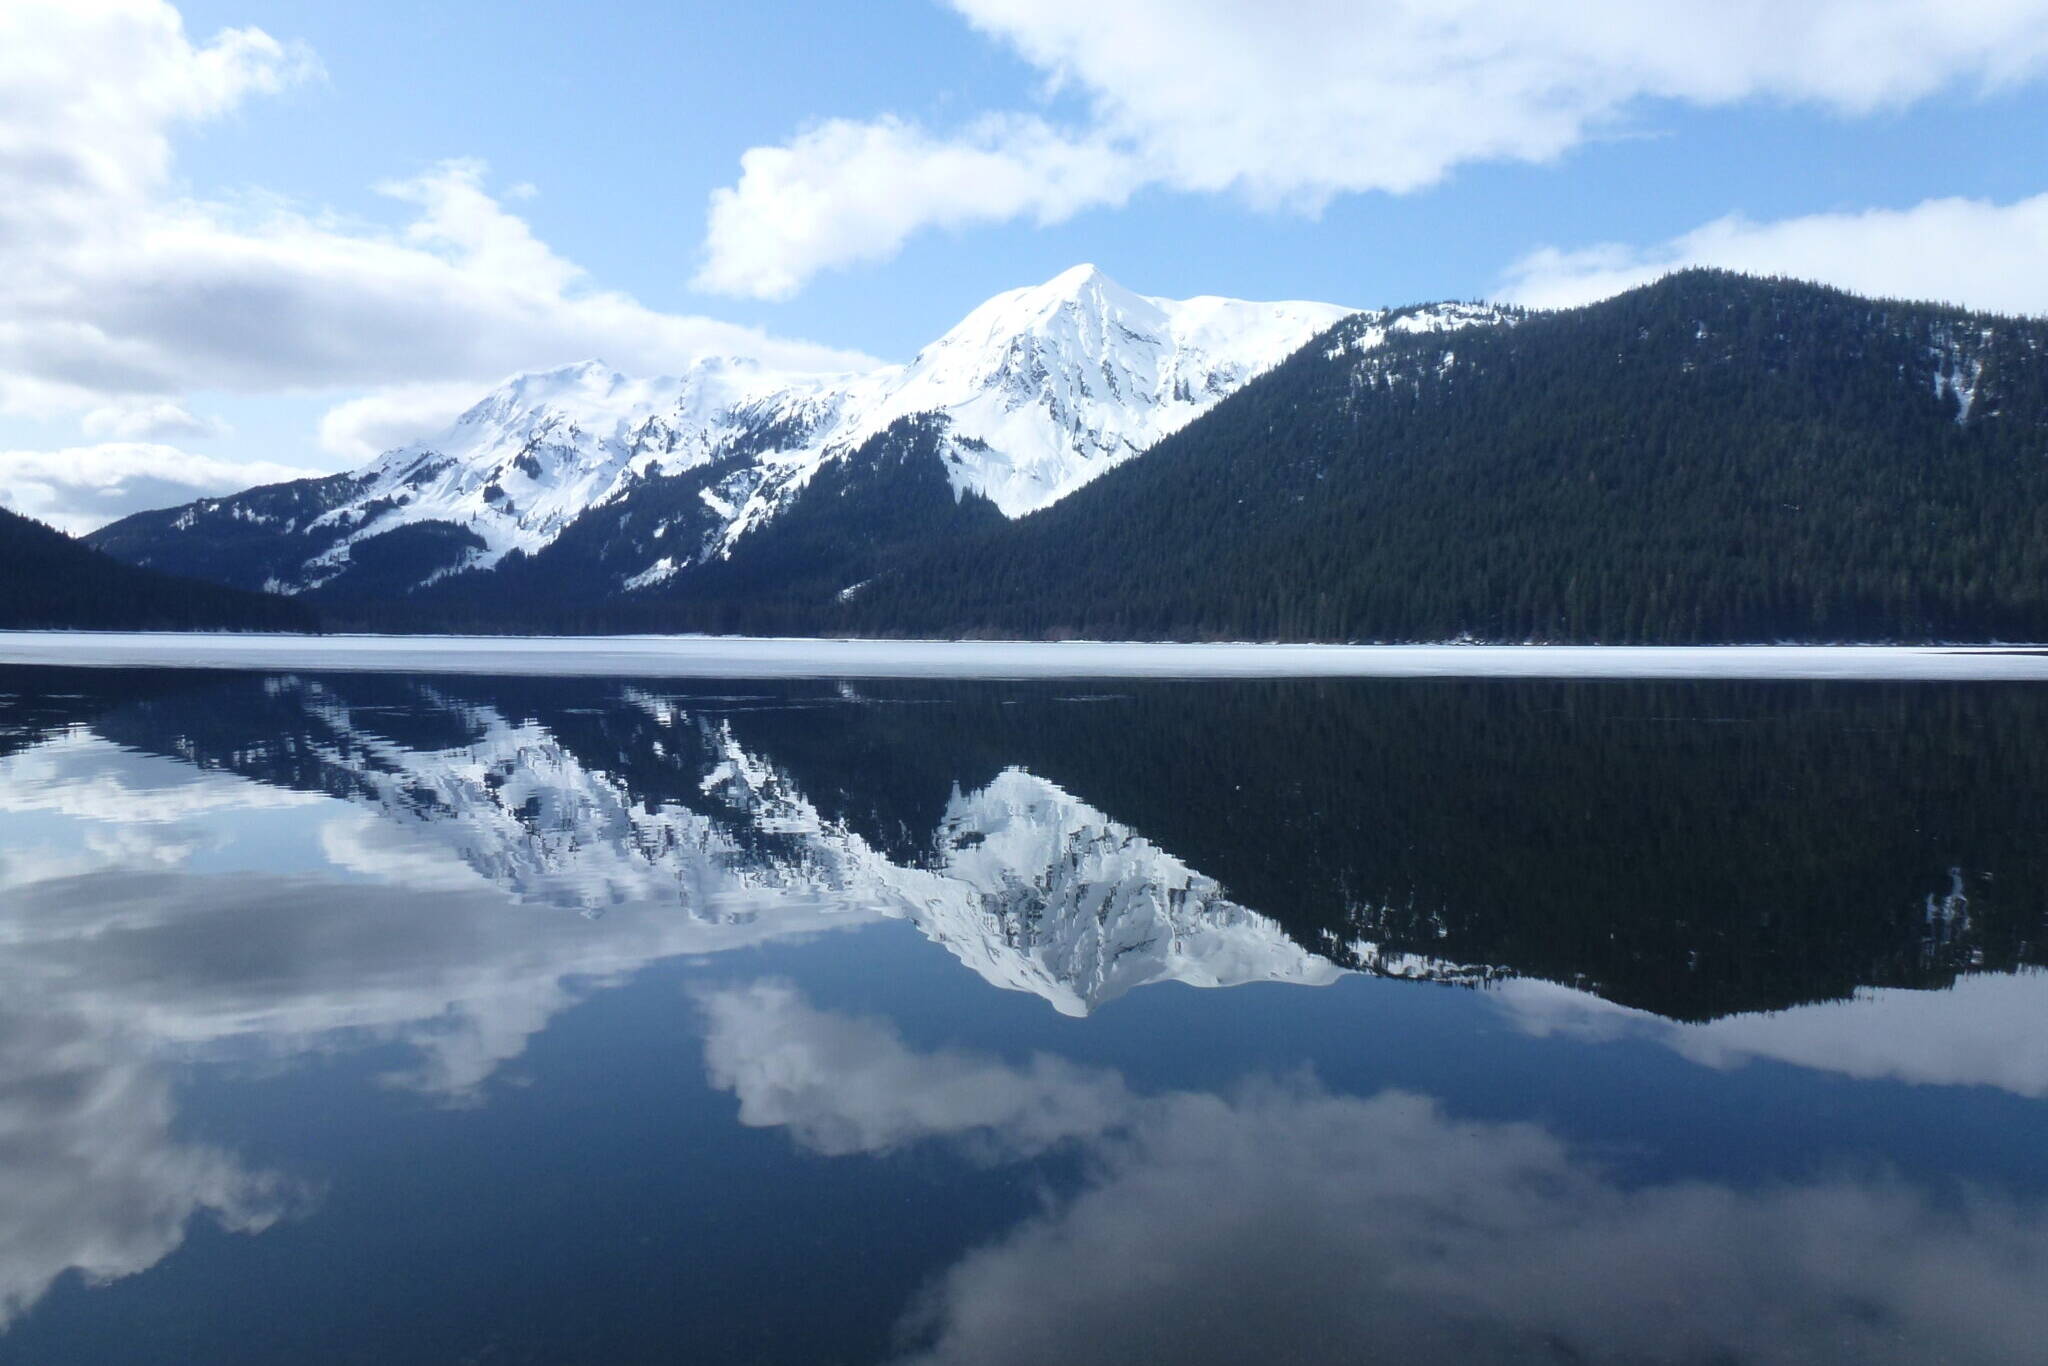 The sky and mountains are reflected in the water on April 5, 2012, at the Kootznoowoo Wilderness in the Tongass National Forest’s Admiralty Island National Monument. Conservation organizations bought some private land and transferred it to the U.S. Forest Service, resulting in an incremental expansion of the Kootznoowoo Wilderness and protection of habitat important to salmon and wildlife. (Photo by Don MacDougall/U.S. Forest Service)